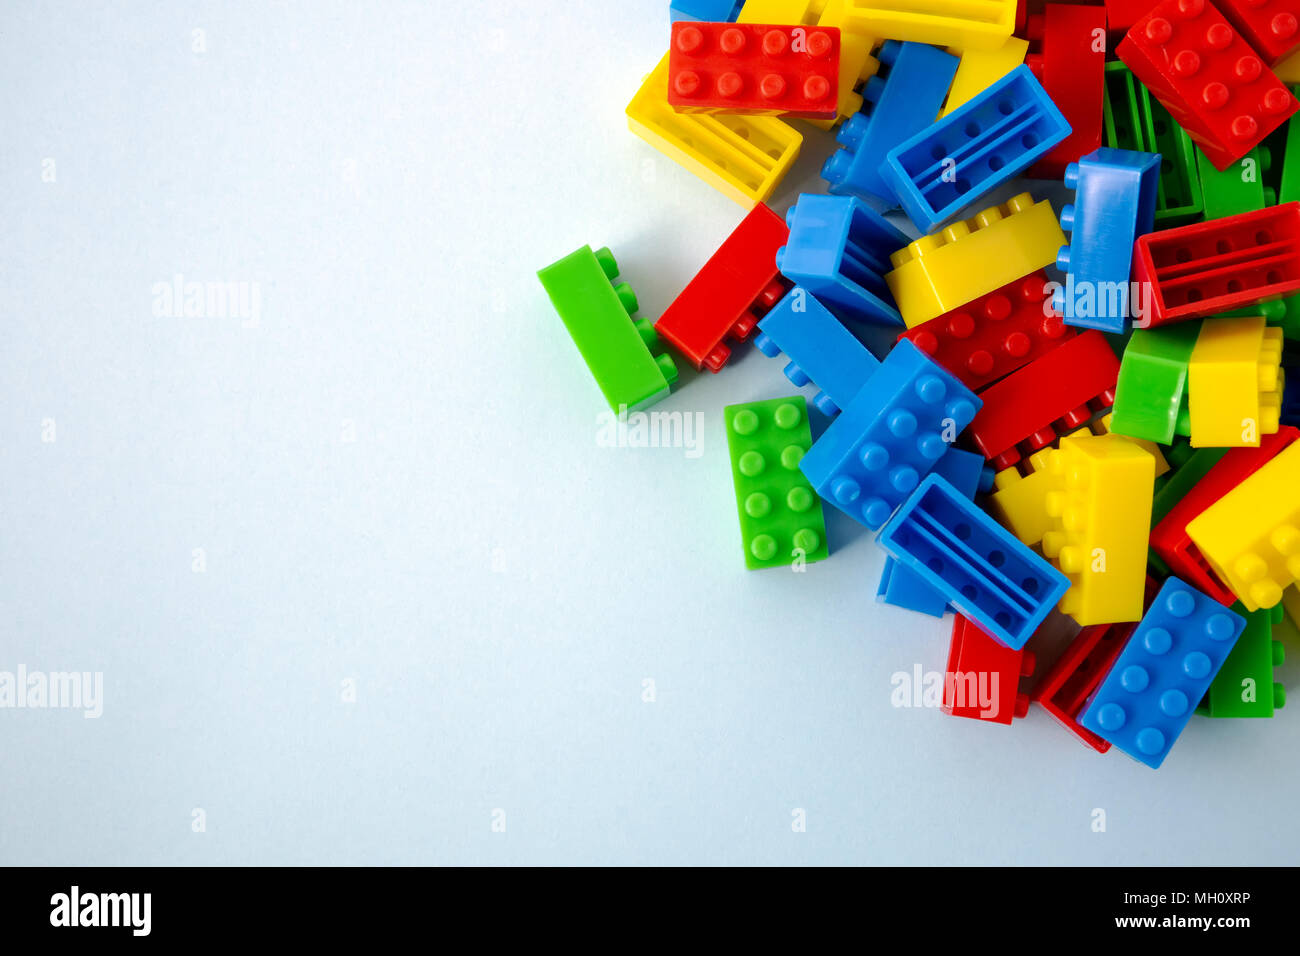 Colorful toy building blocks on blue background Stock Photo